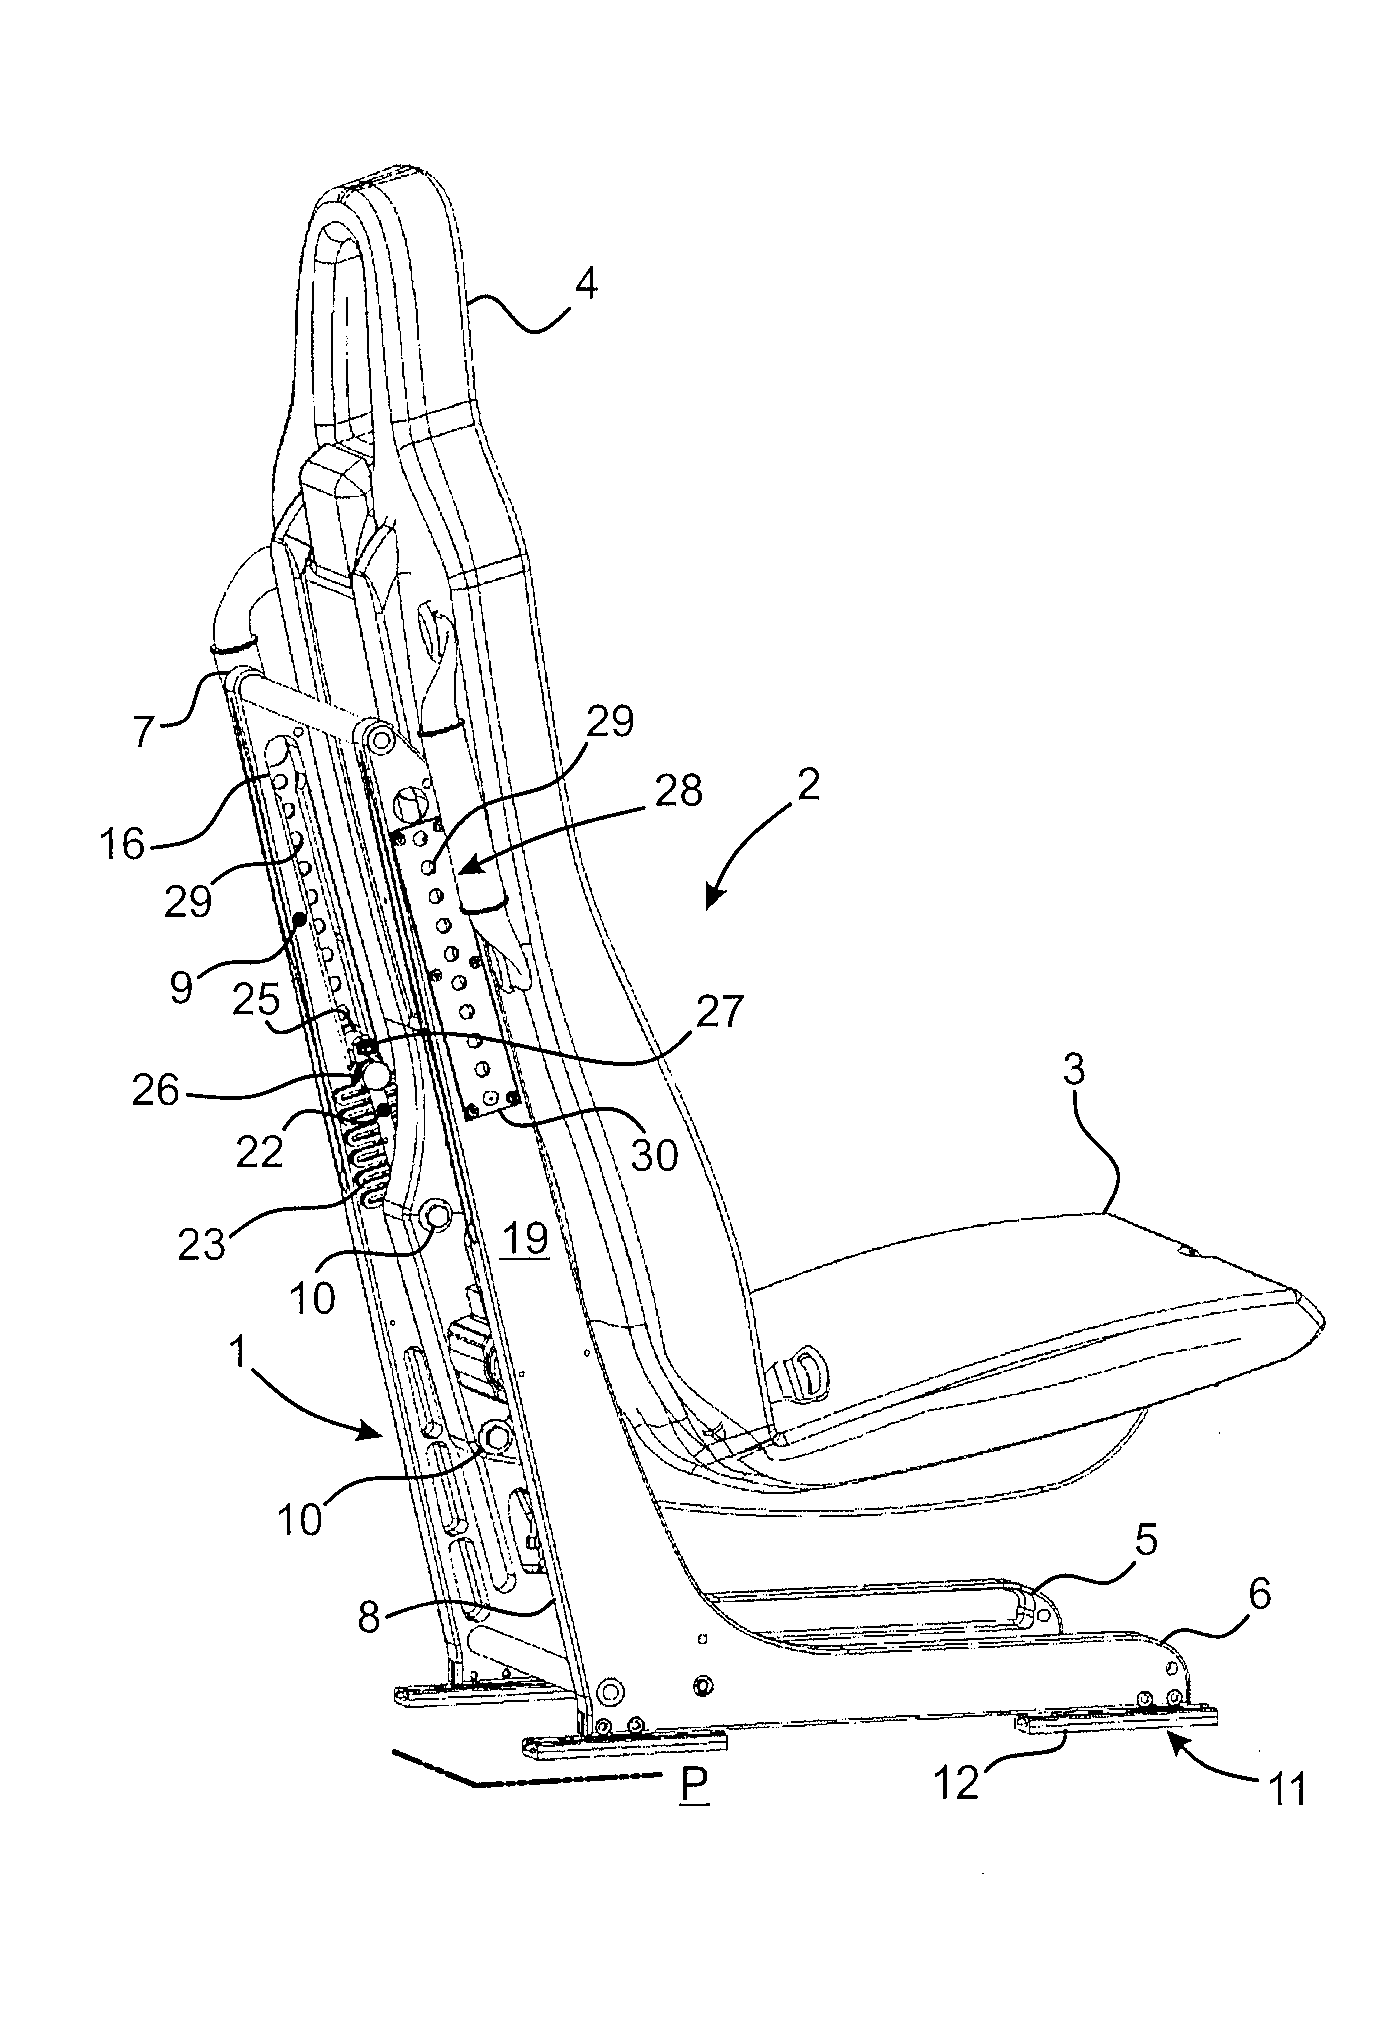 Seat for powered aircraft, the seat incorporating means for protecting its passenger in the event of a crash